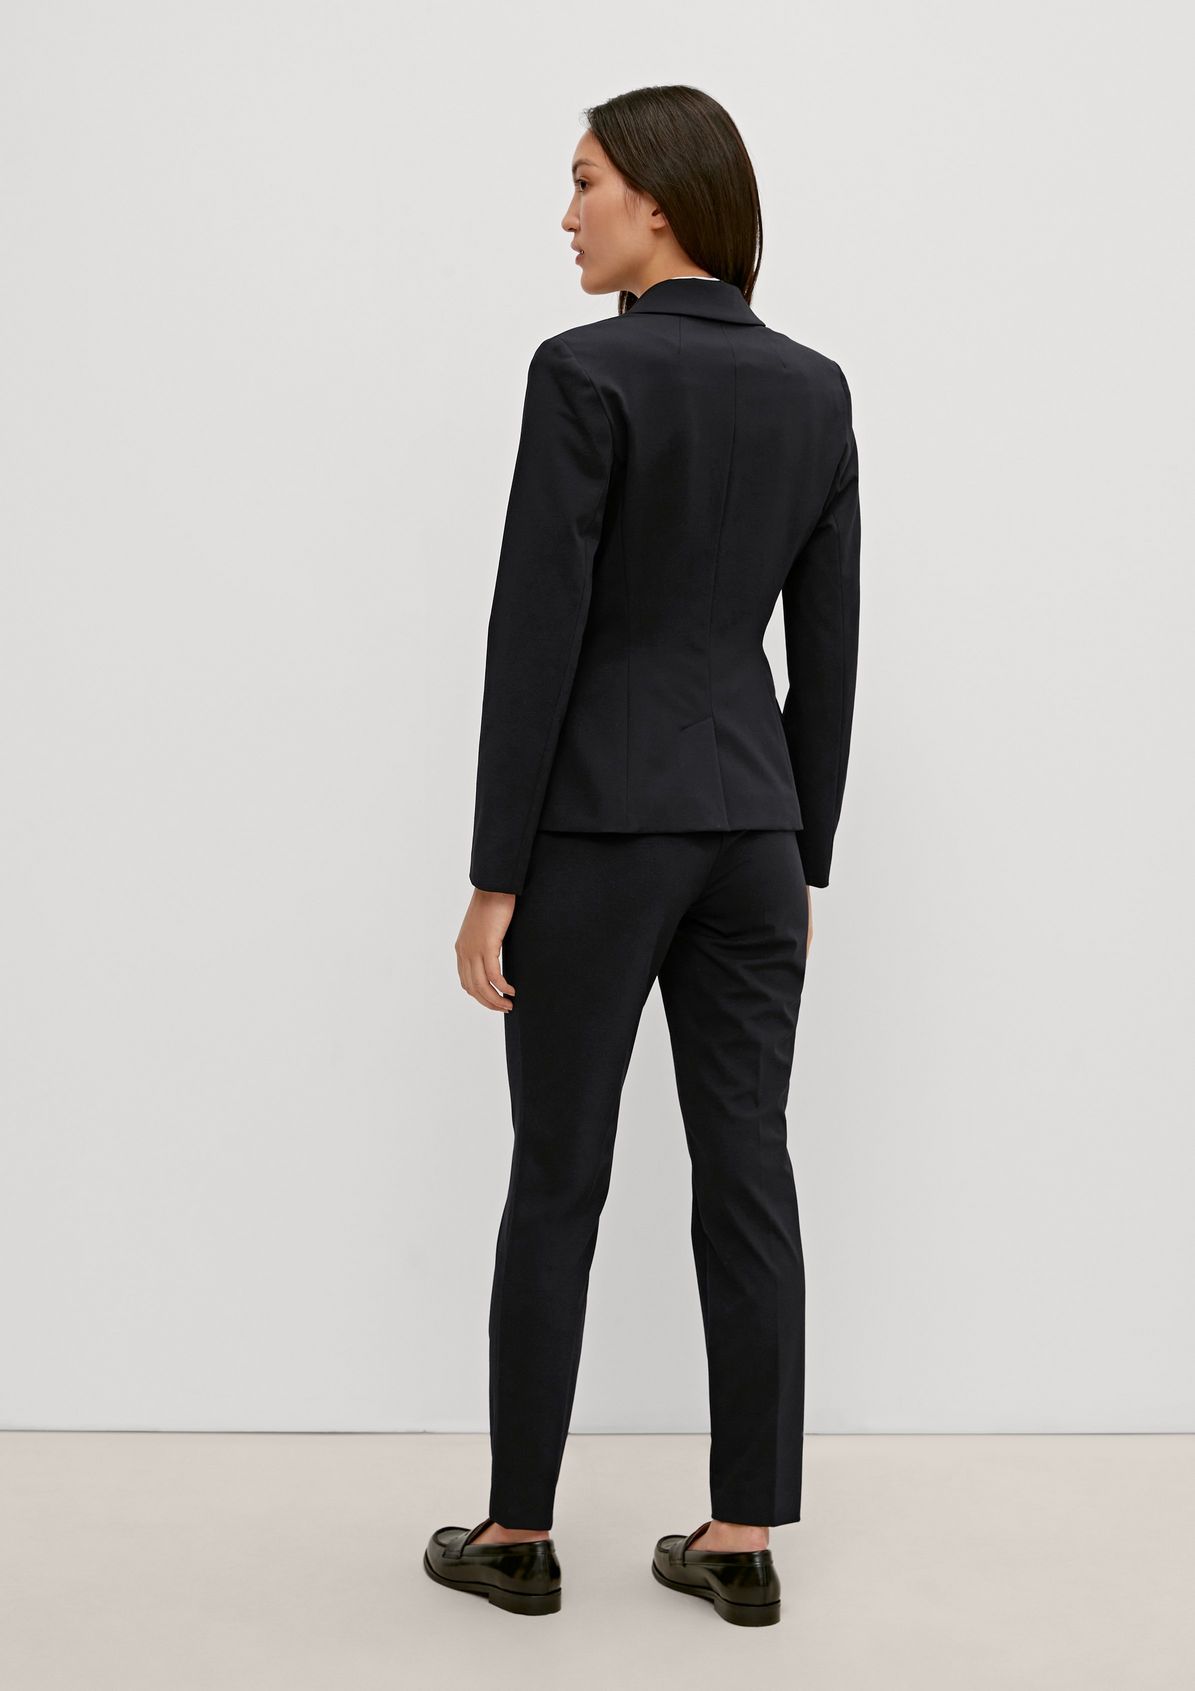 Blazer with mock flap pockets from comma